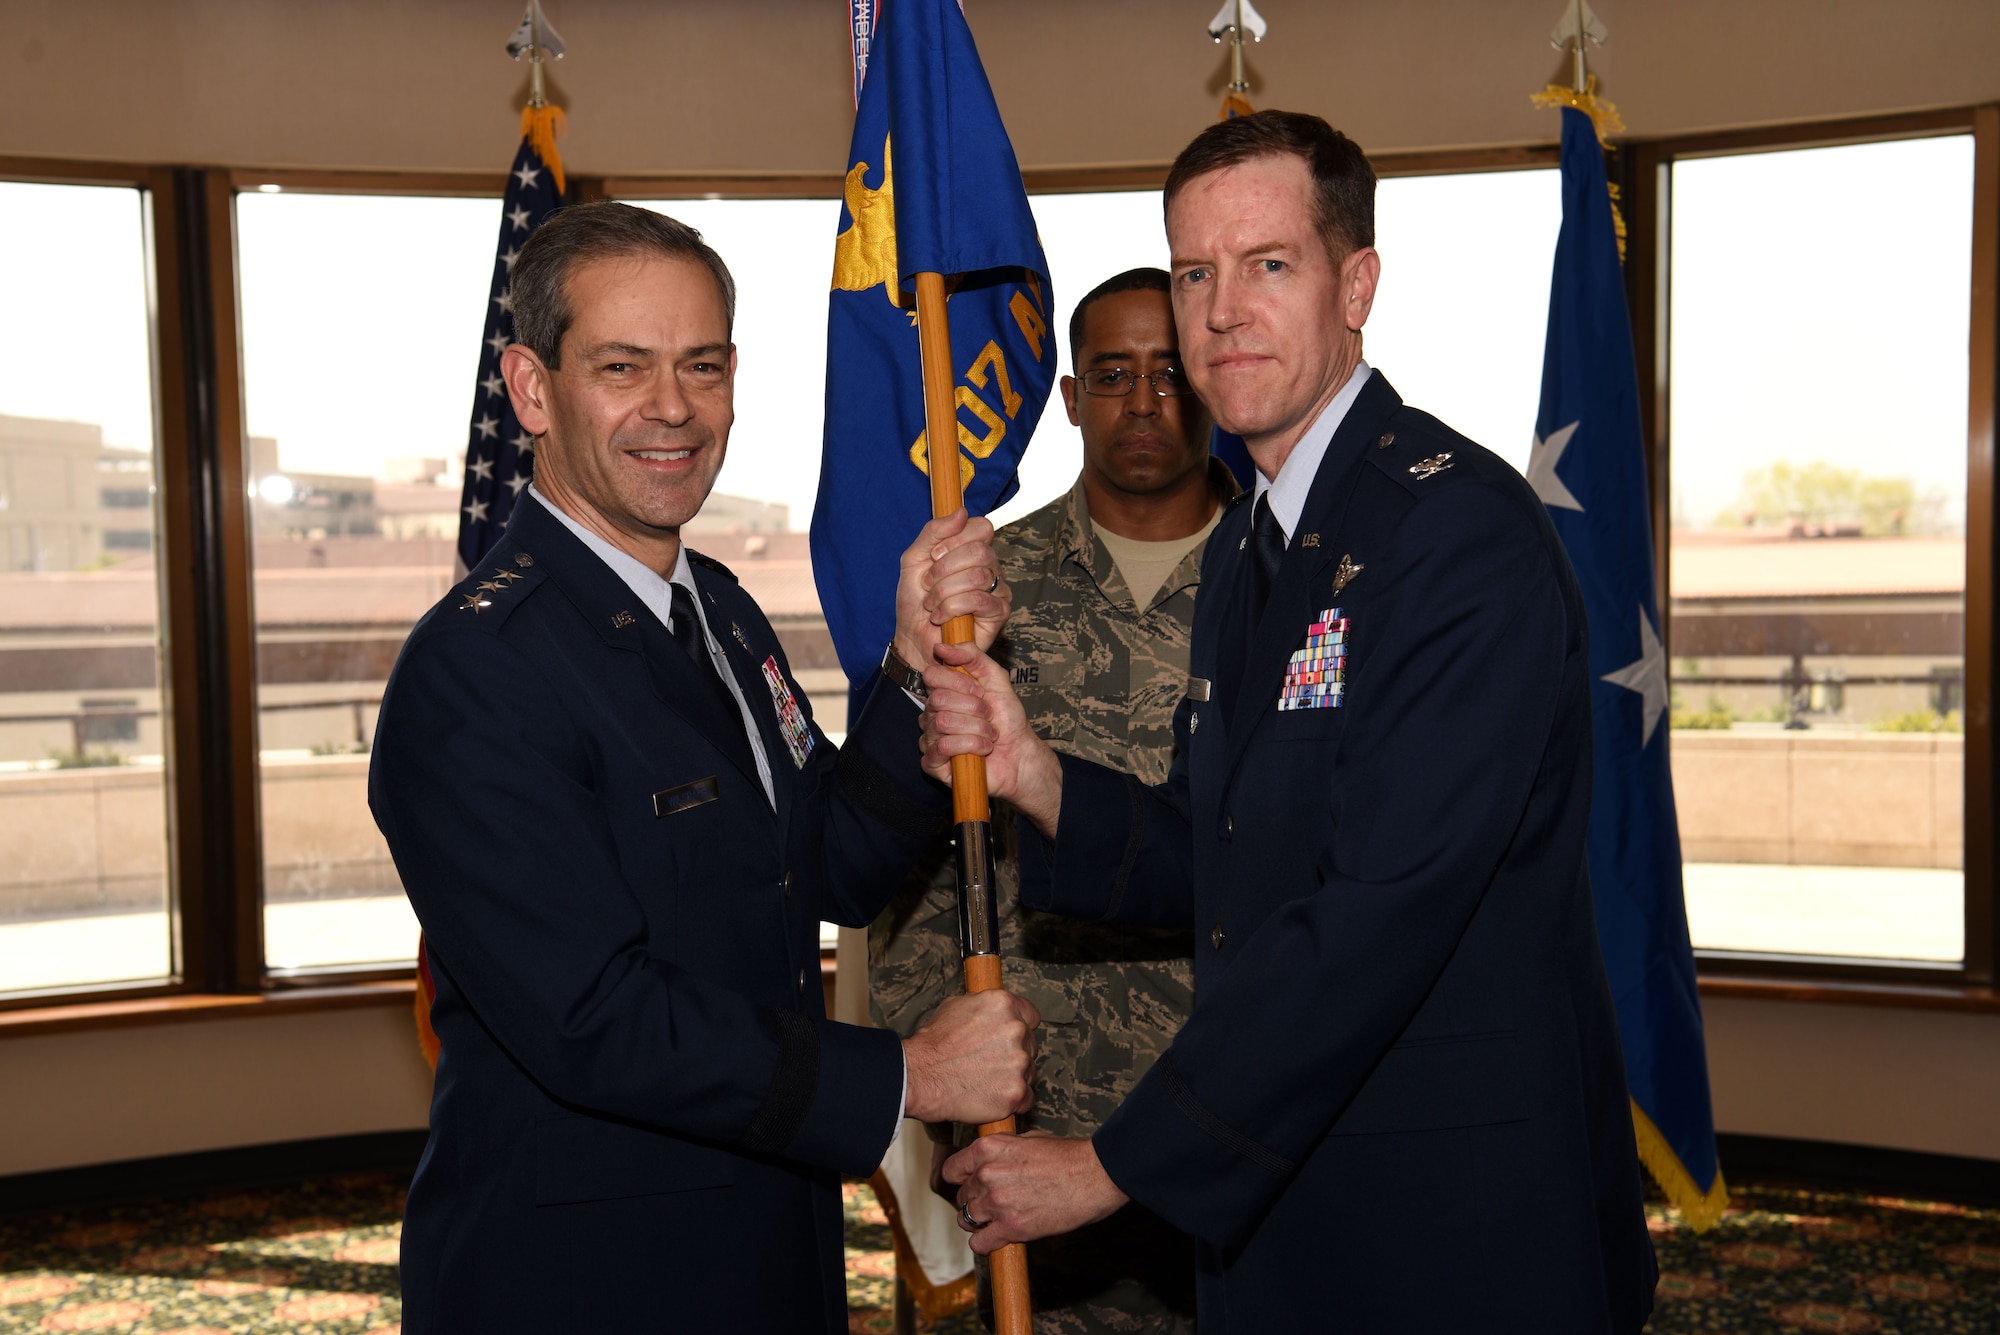 U.S. Air Force Lt. Gen. Kenneth S. Wilsbach, Seventh Air Force commander, passes the 607th Air Operations Center guidon to Col. Christopher Russell, incoming commander, during an assumption of command ceremony at Osan Air Base, Republic of Korea, April 5, 2019. The passing of the guidon symbolizes a change of leadership and responsibility. (U.S. Air Force photo by Staff Sgt. Kelsey Tucker)